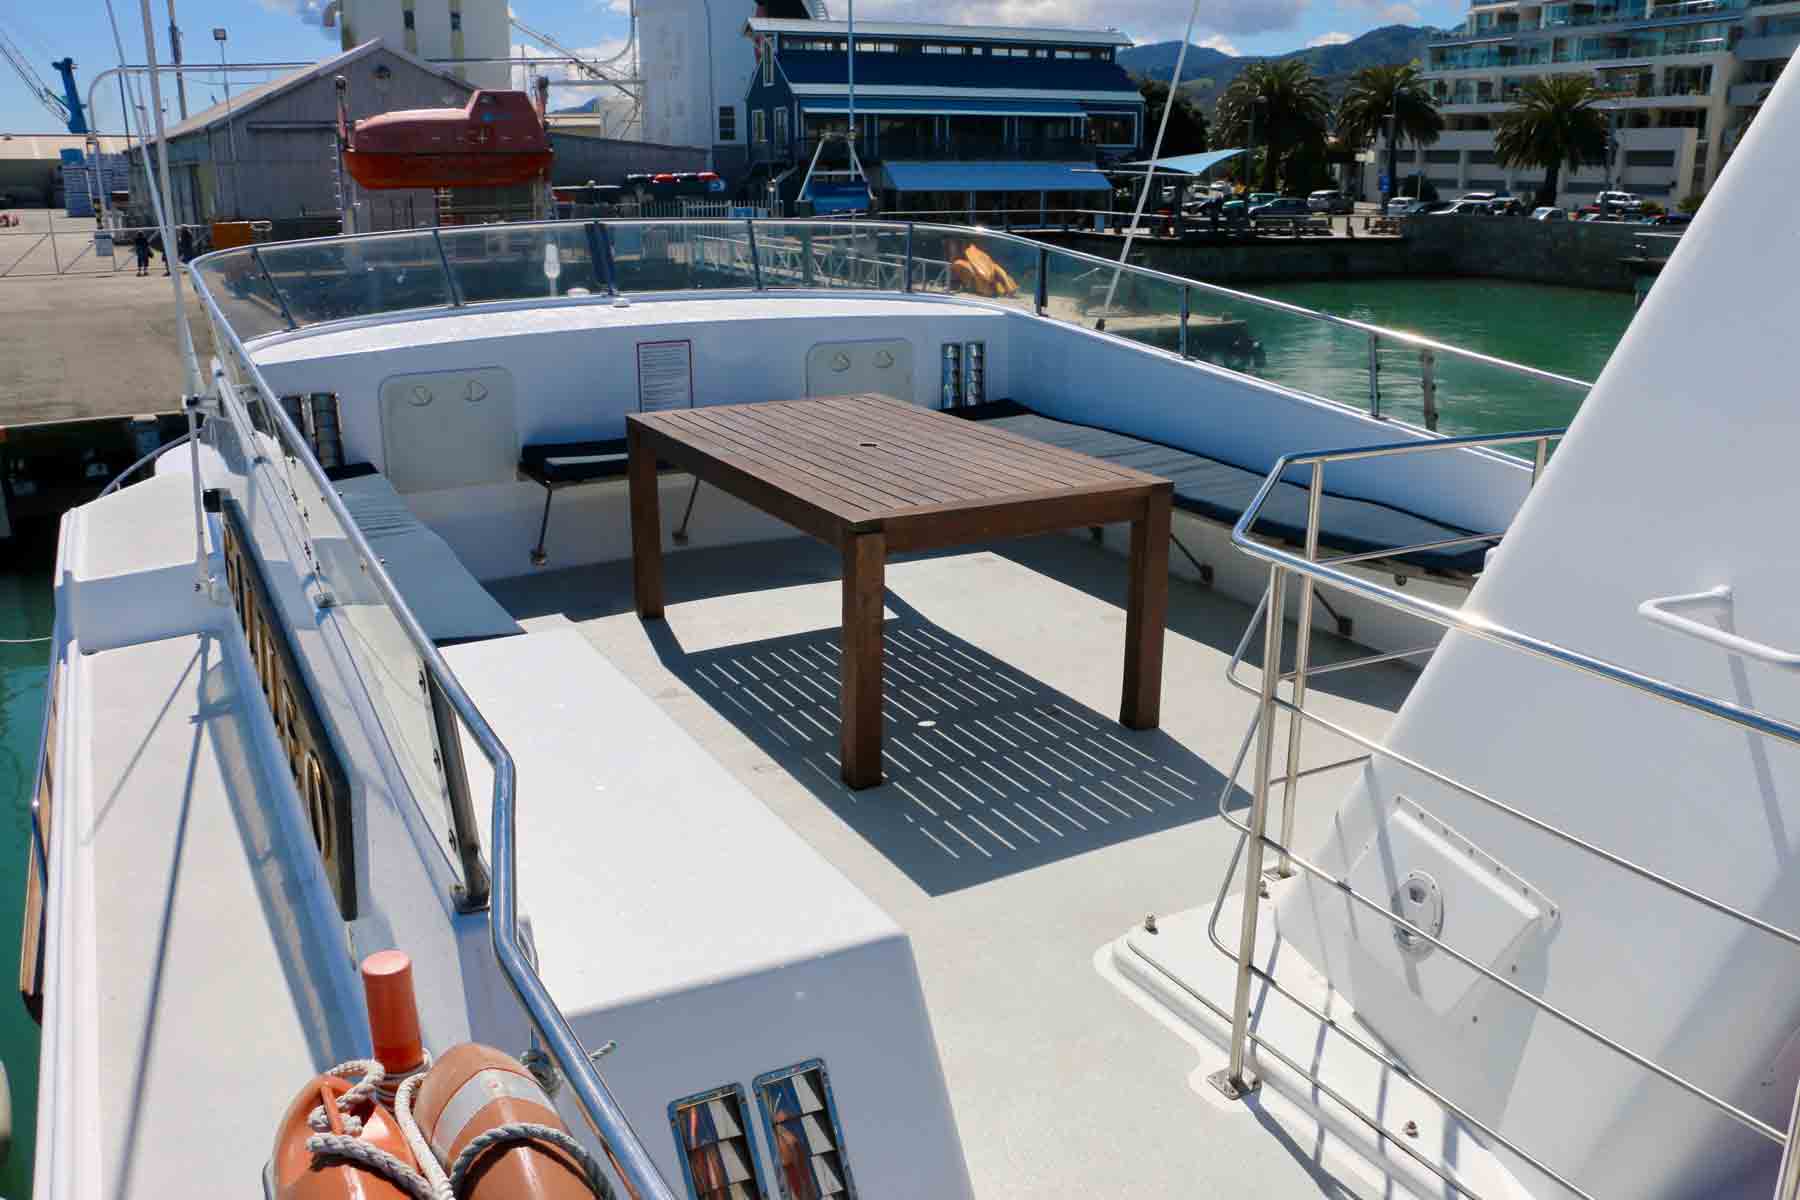 Outdoor seating is available on the top deck so that you can take in the amazing New Zealand scenery